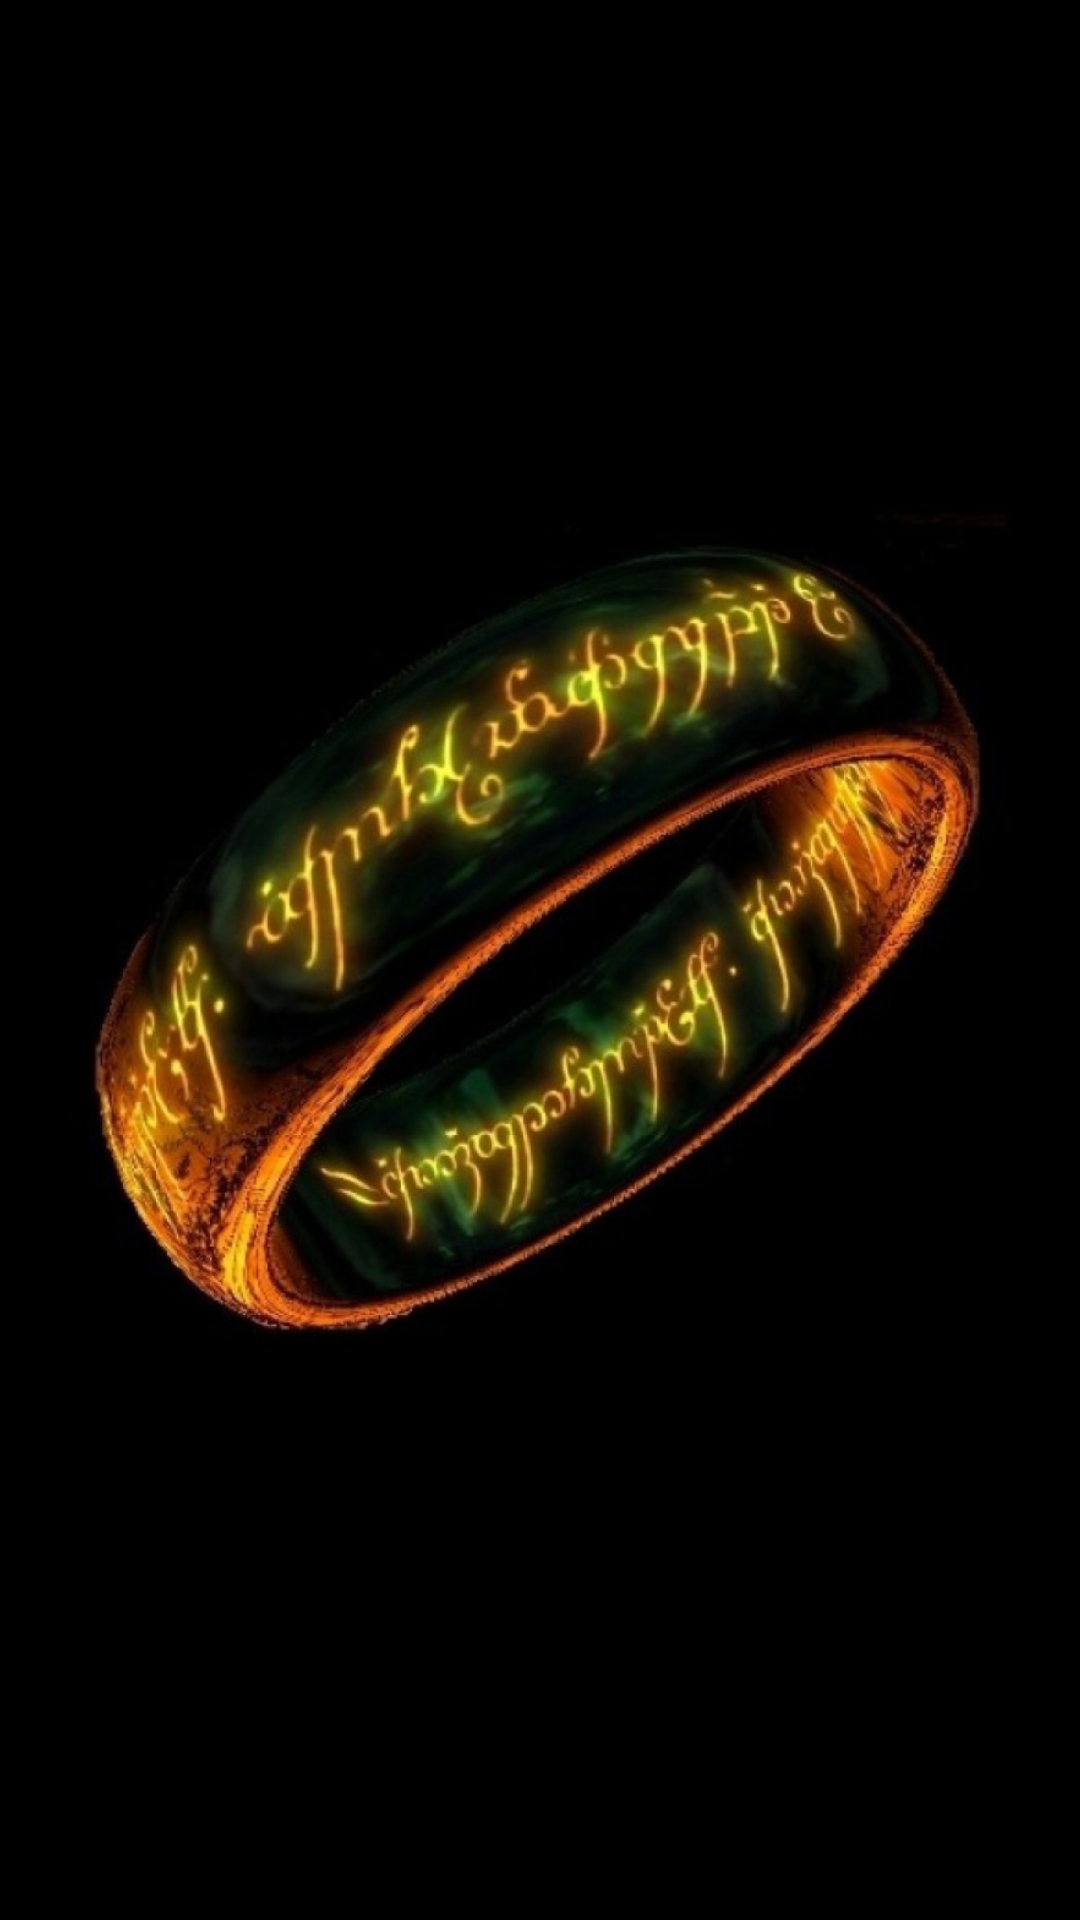 The Lord of the Rings screenshot #1 1080x1920